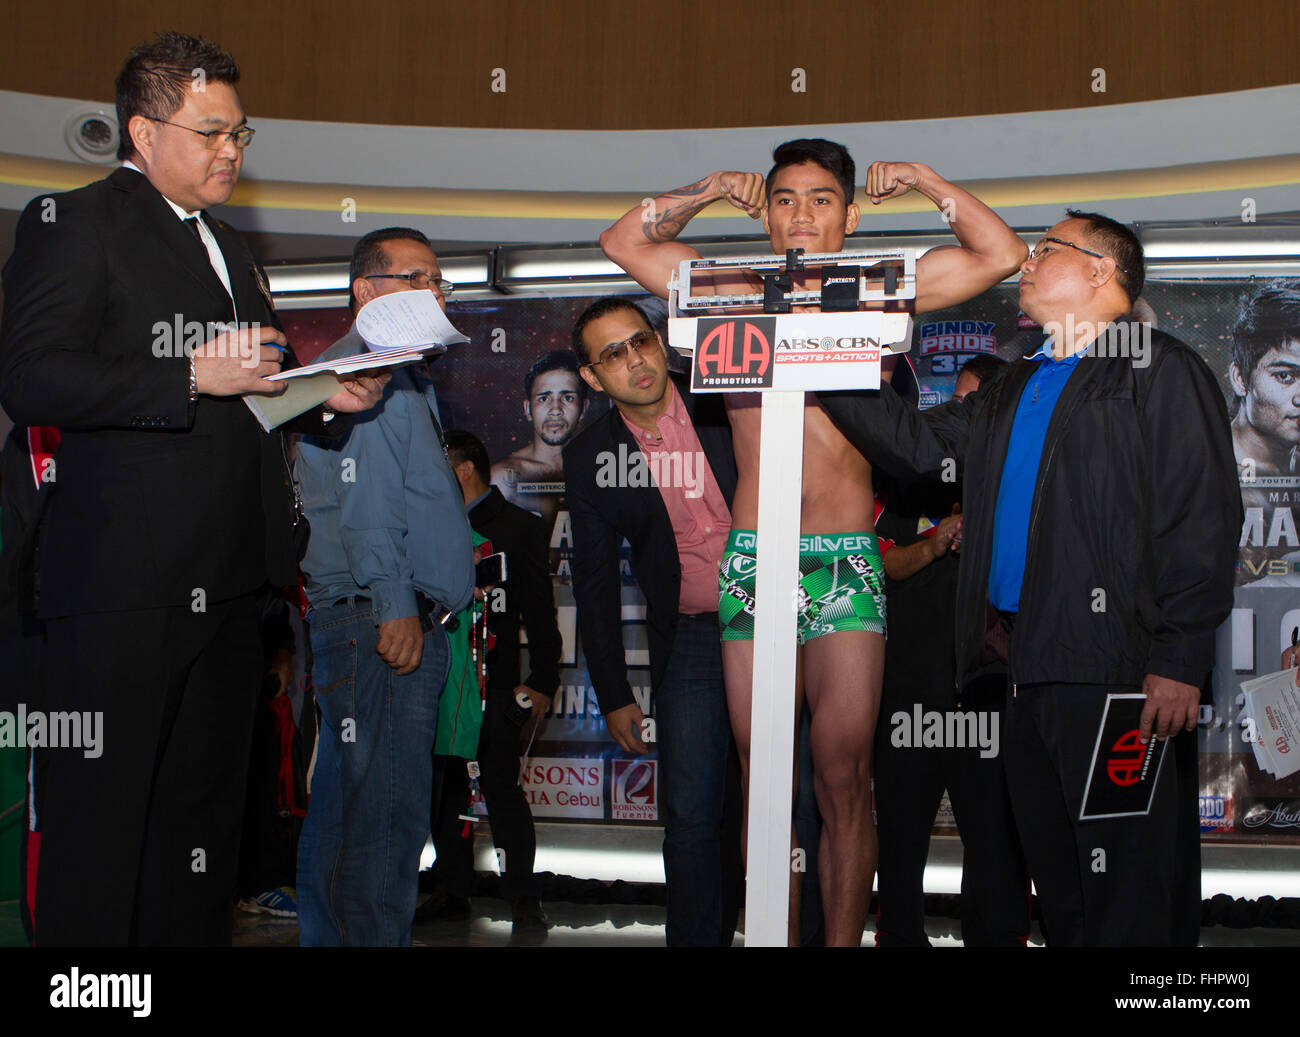 Cebu city, Philippines. 26th February, 2016. Weigh-In for Pinoy Pride 35 'Stars of The Future'. WBO Youth Featherweight Champion & highly rated Filipino prospect Mark 'Magnifico' Magsayo (W12-L0-D0 Philippines) puts his belt on the line against Eduardo 'Fierita' Montoya (W17 L4 D1 Mexico) Magsayo on scales. Credit:  imagegallery2/Alamy Live News Stock Photo